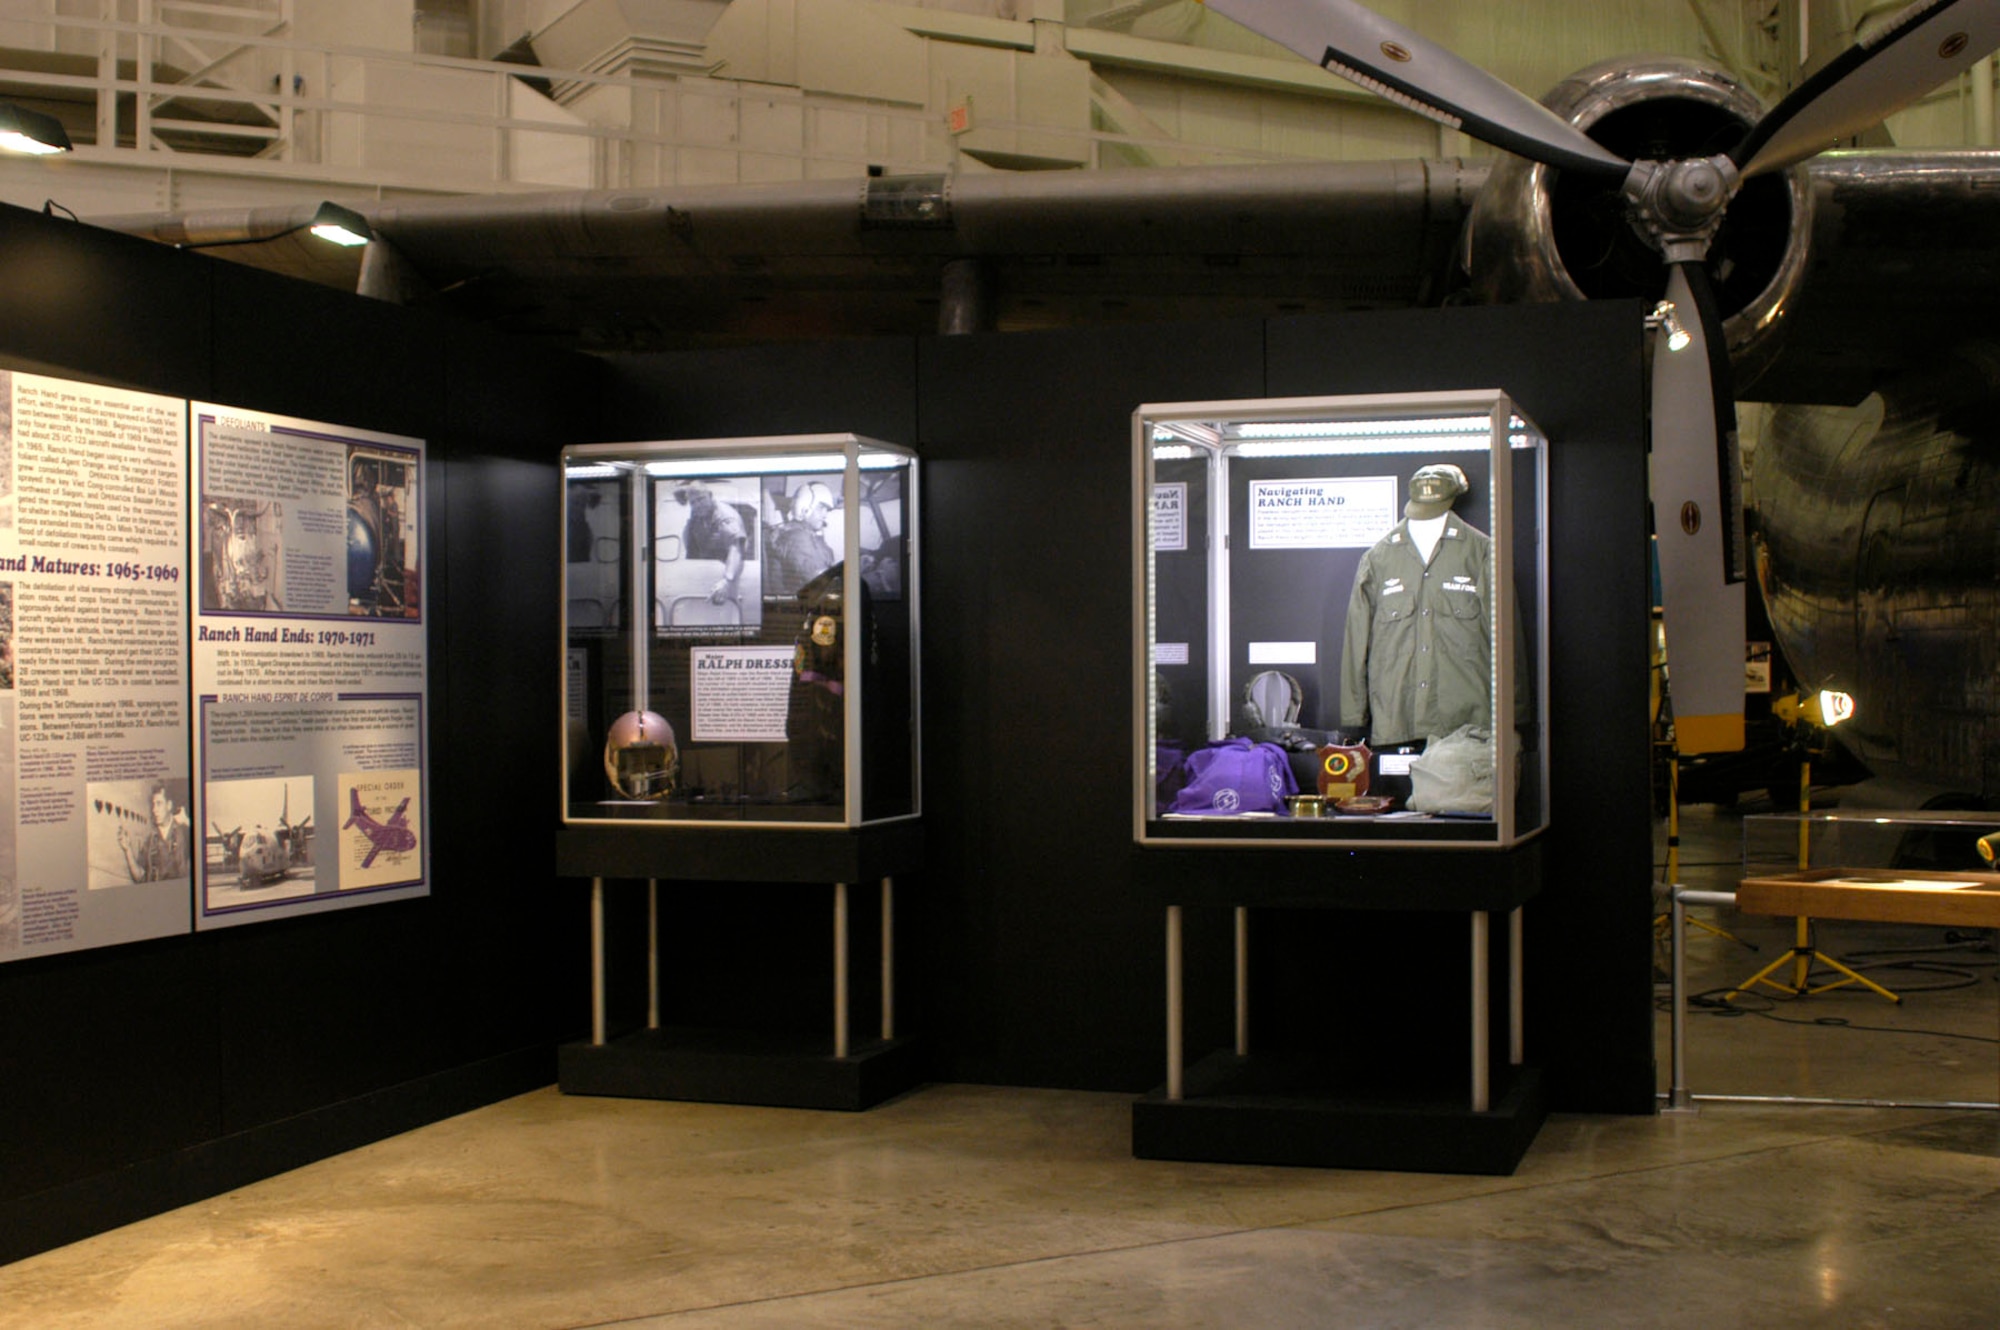 DAYTON, Ohio - A portion of the Ranch Hand exhibit at the National Museum of the U.S. Air Force. (U.S. Air Force photo)